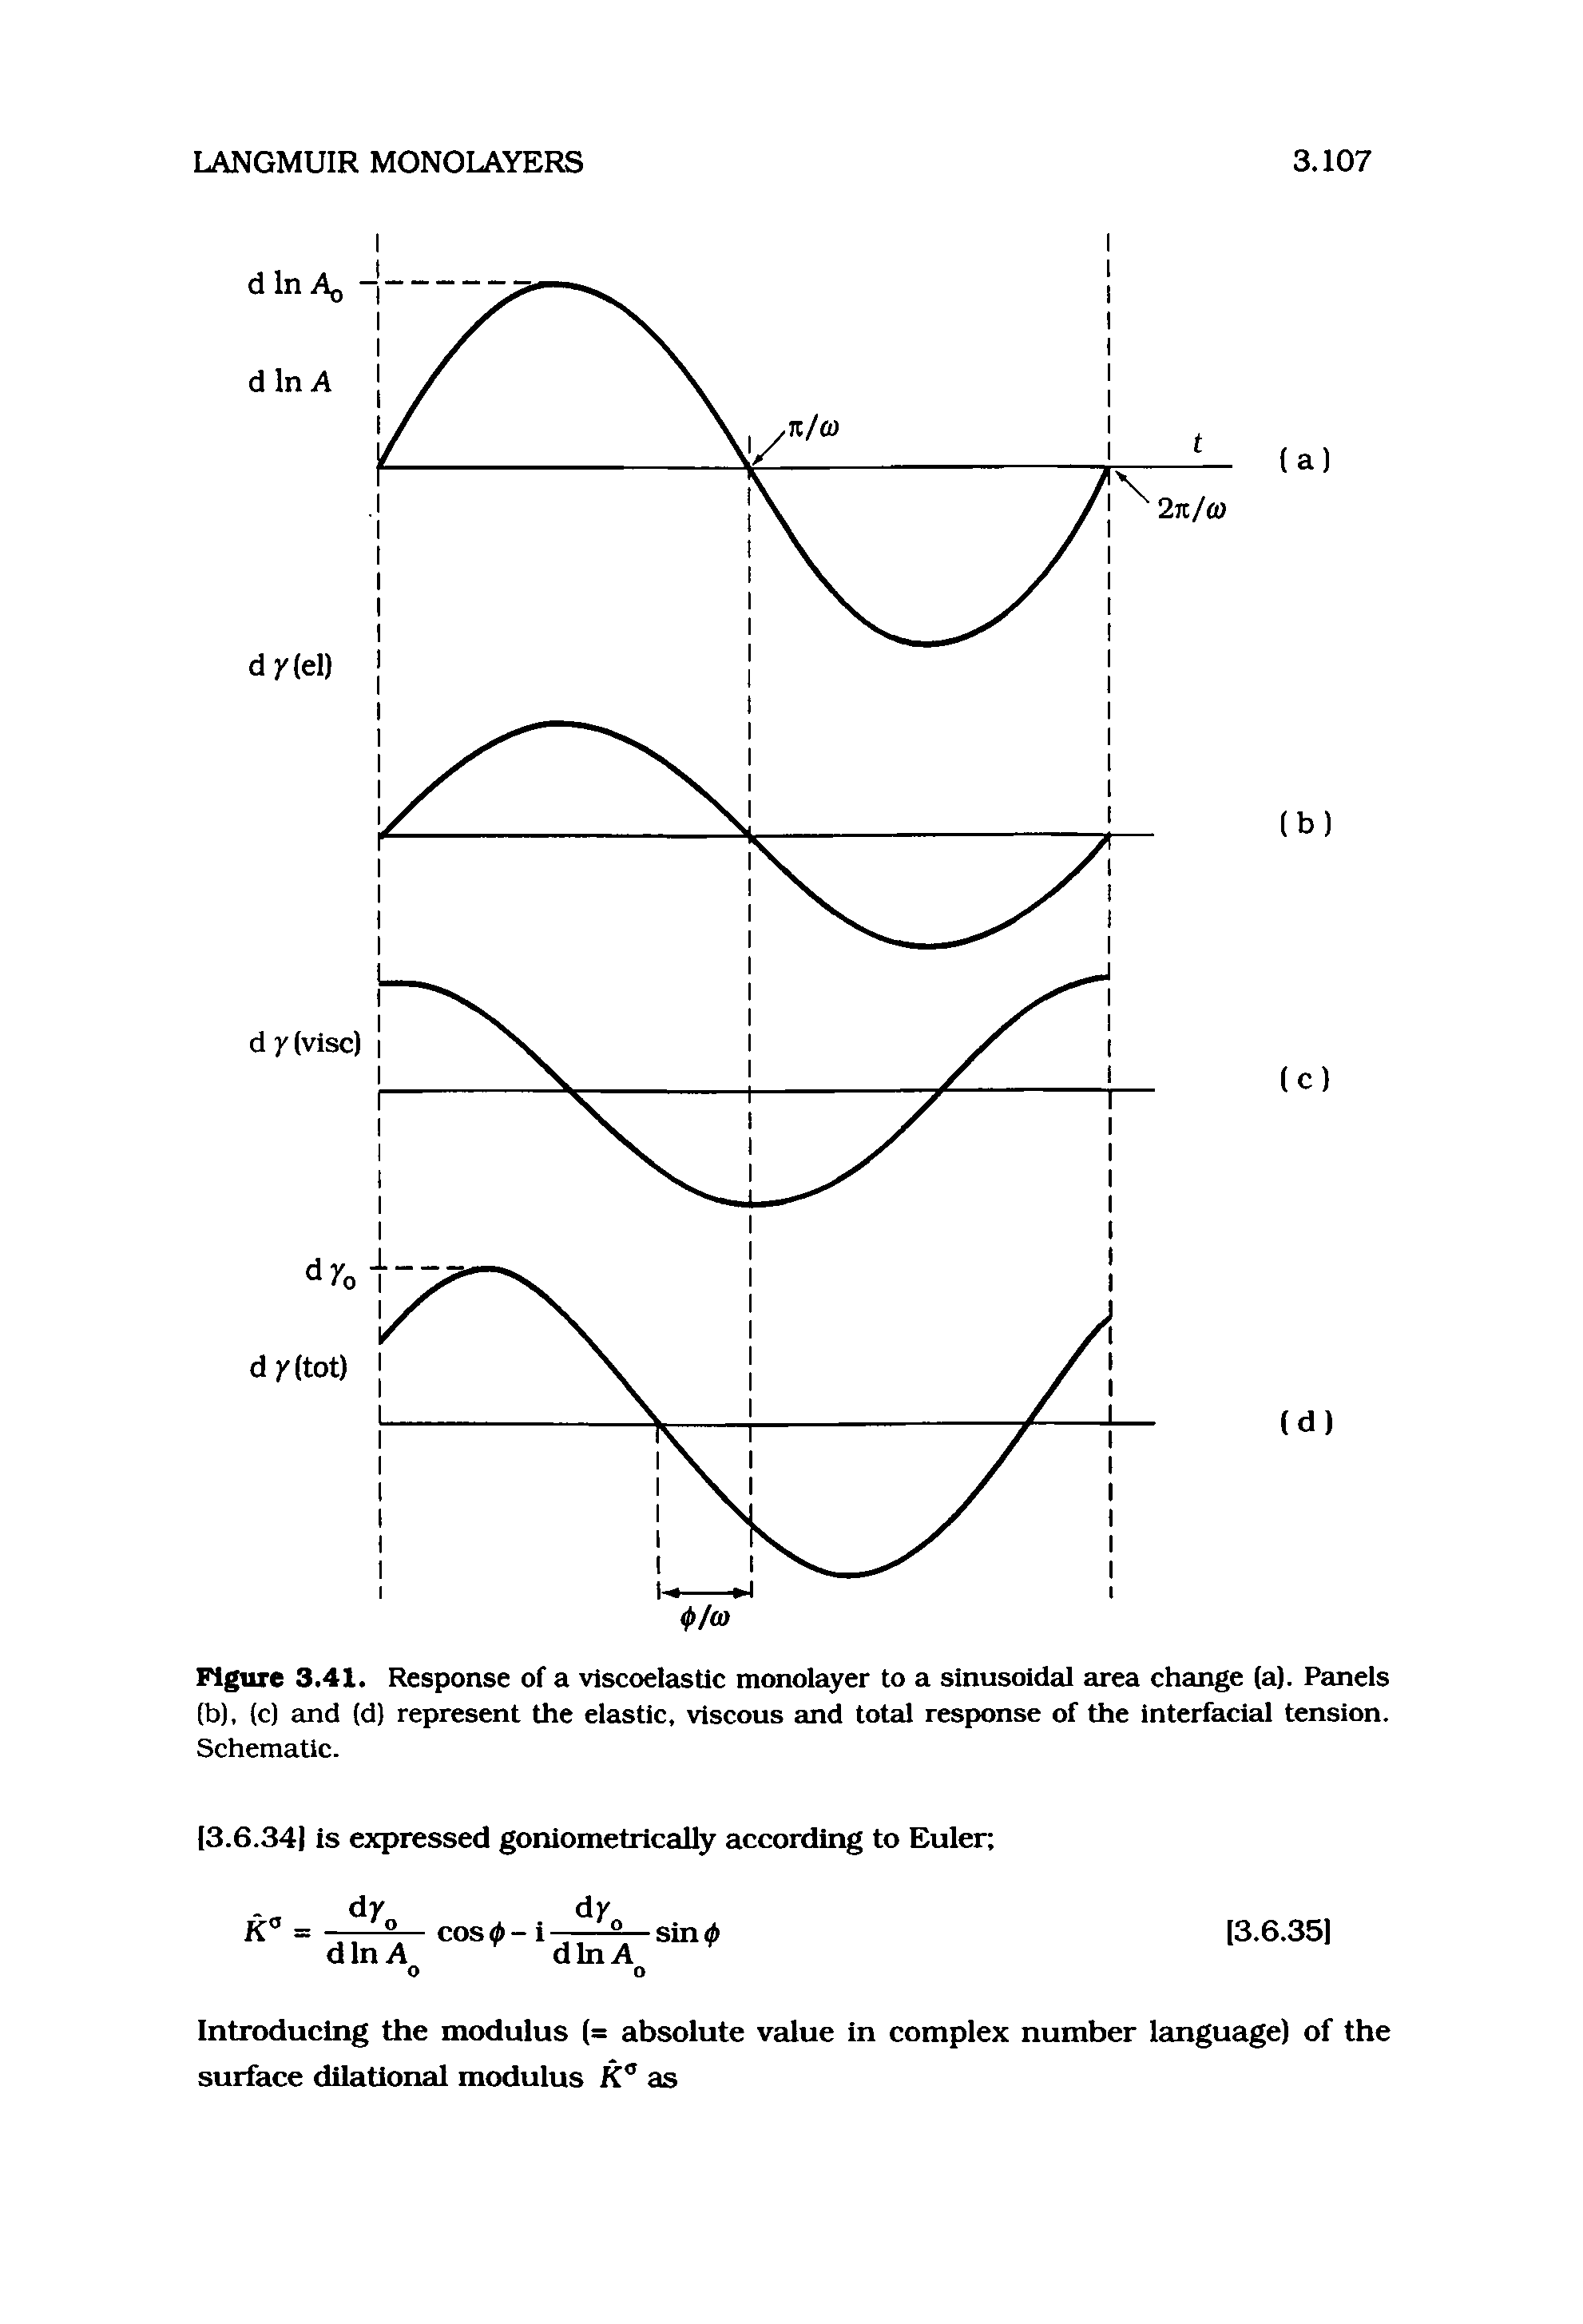 Figure 3.41. Response of a viscoelastic monolayer to a sinusoidal area change (a). Peuiels (b), (c) and (d) represent the elastic, viscous lnd total response of the Interfaclal tension. Schematic.